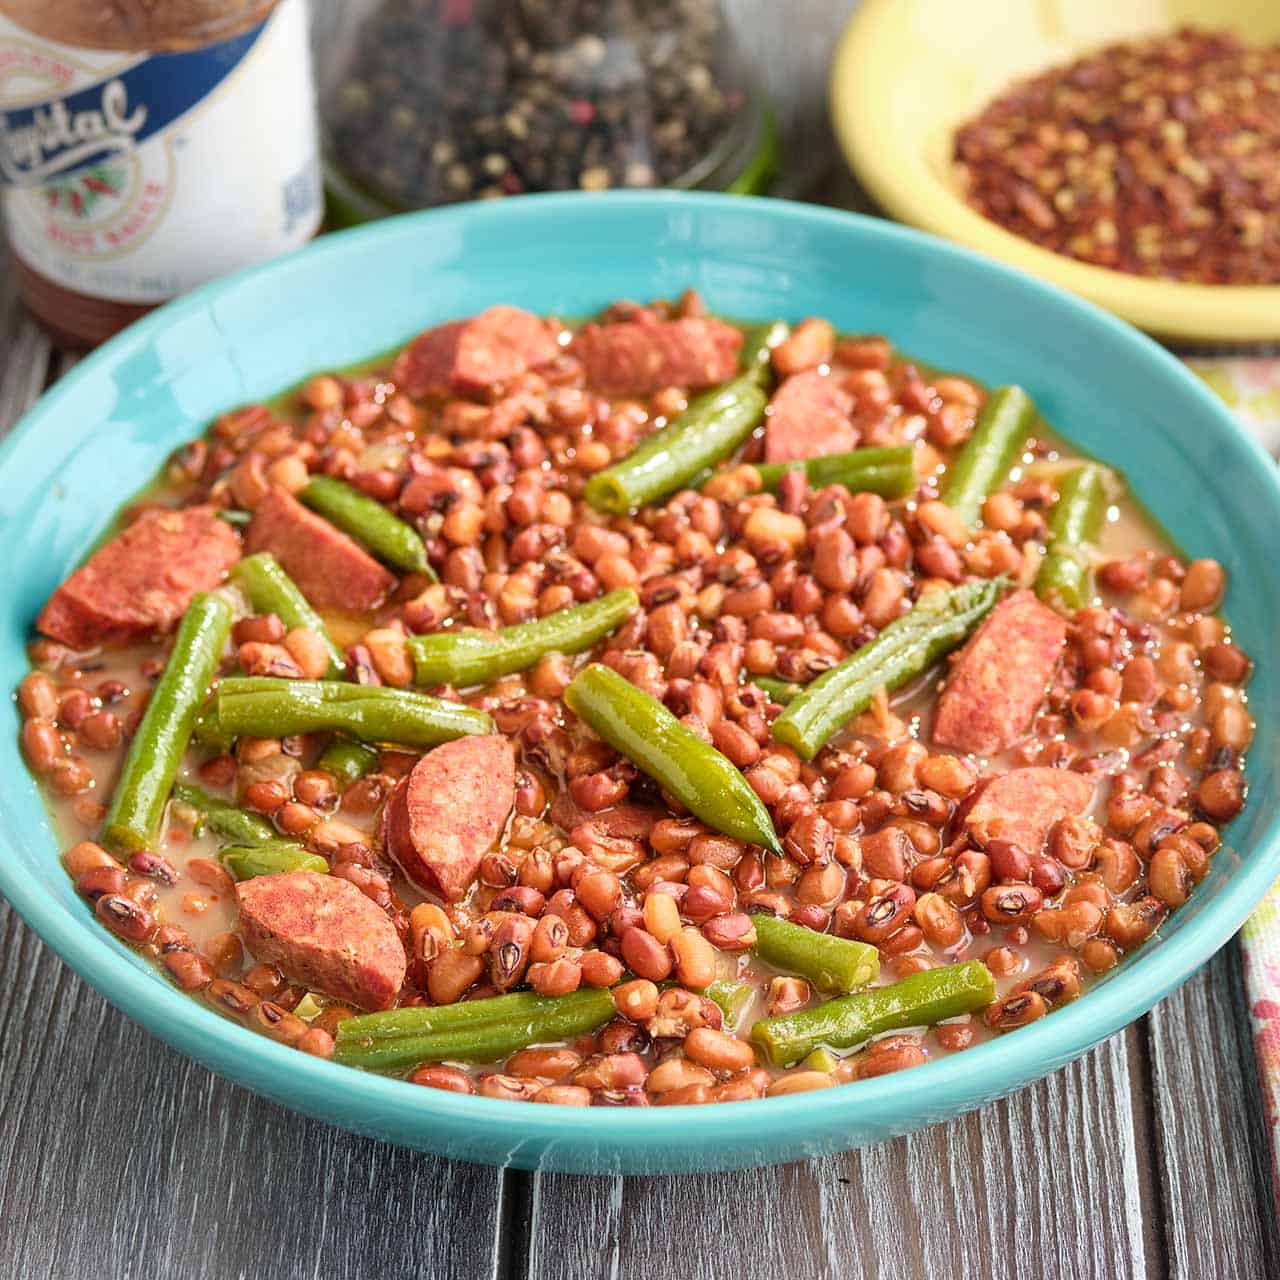 A bowl of field peas and snapped green beans, with red pepper flakes, black pepper, and hot sauce in the background